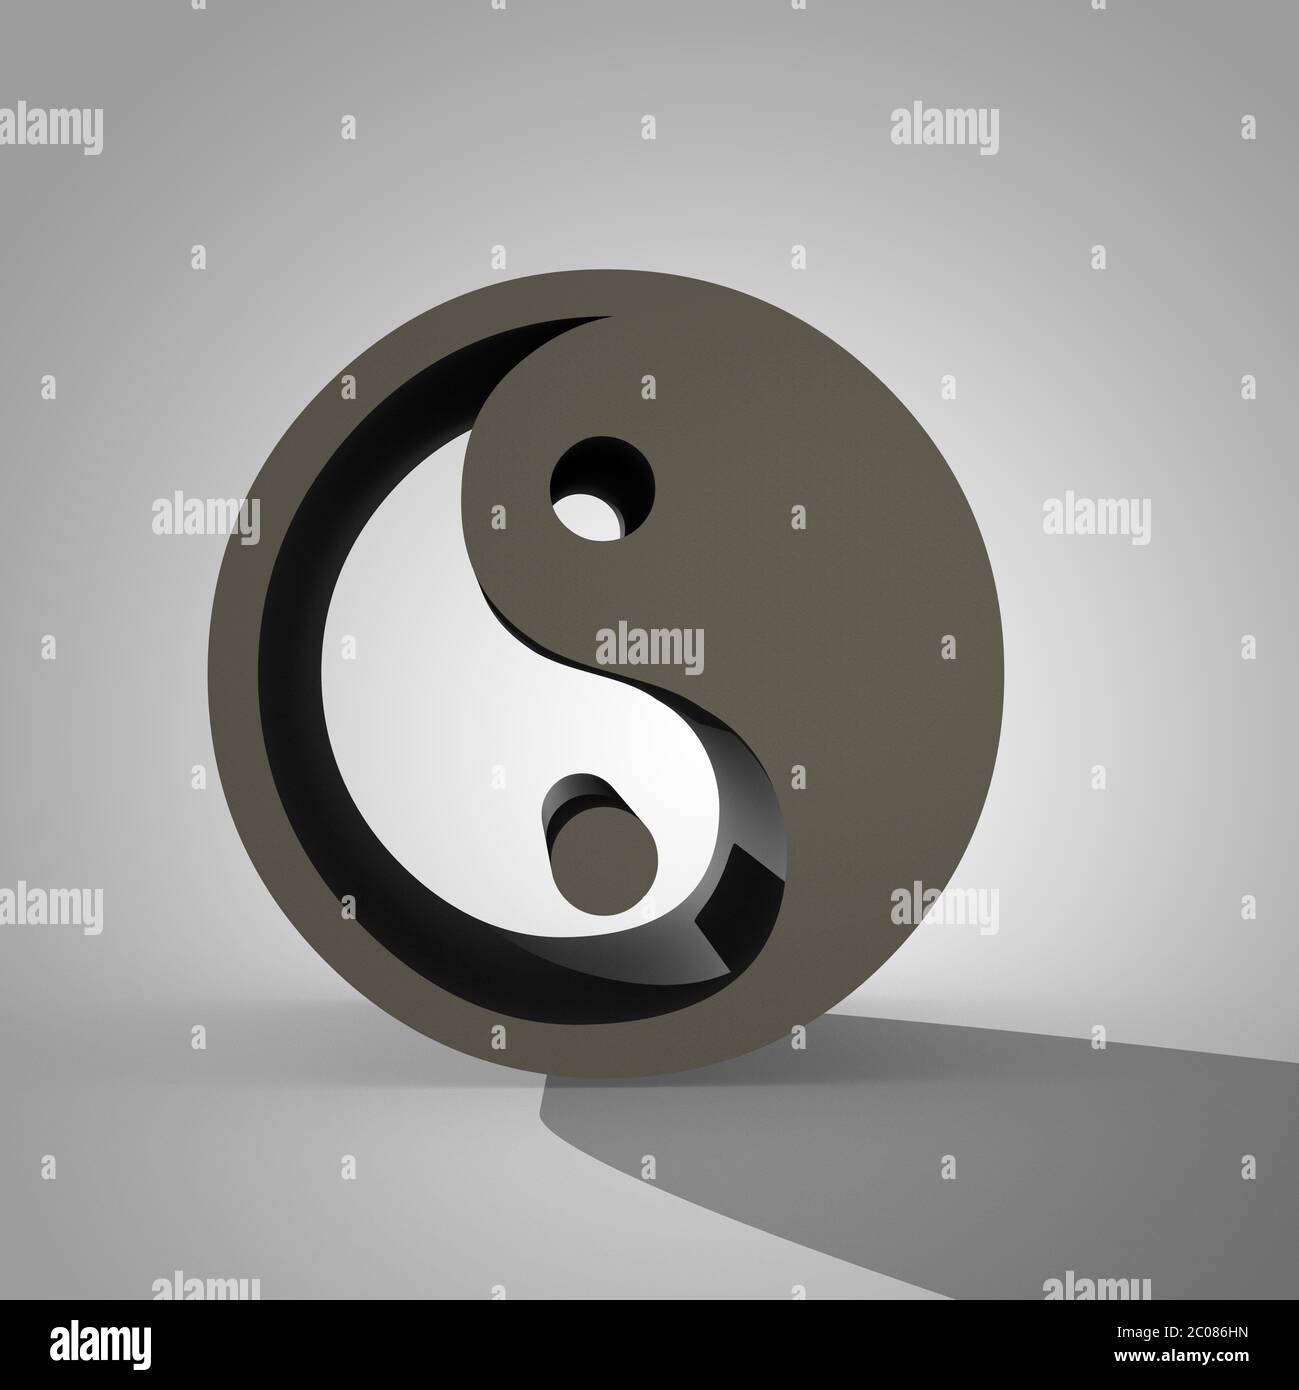 3d Yin and Yang sign, Chinese symbol of Taoism Stock Photo